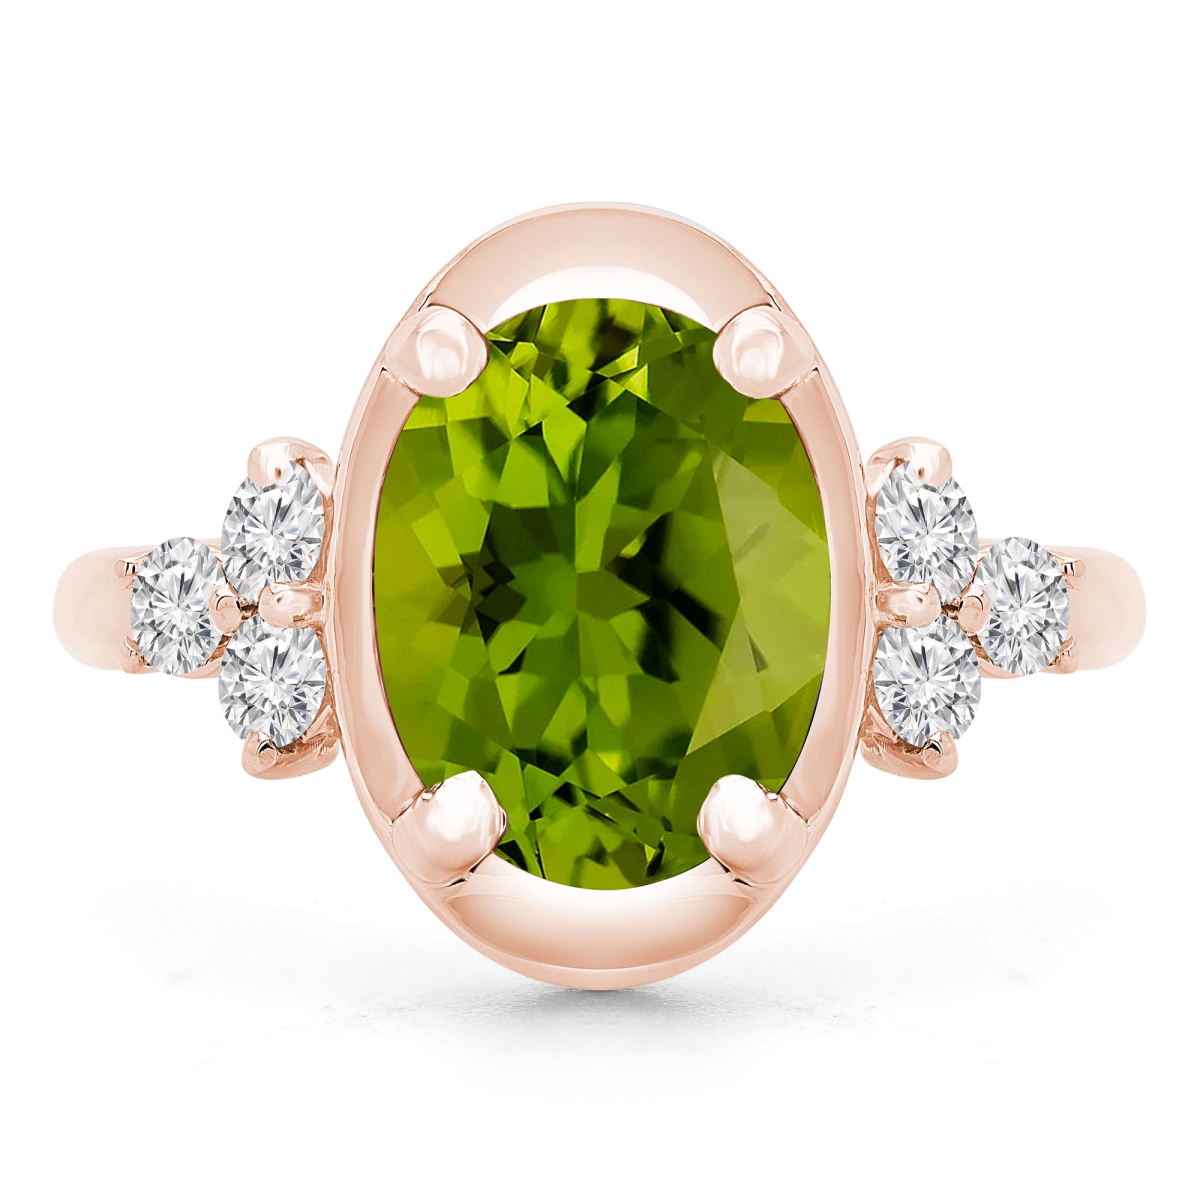 Picture of Majesty Diamonds MD190412-8 3.9 CTW Oval Green Peridot Cocktail Ring in 14K Rose Gold - Size 8